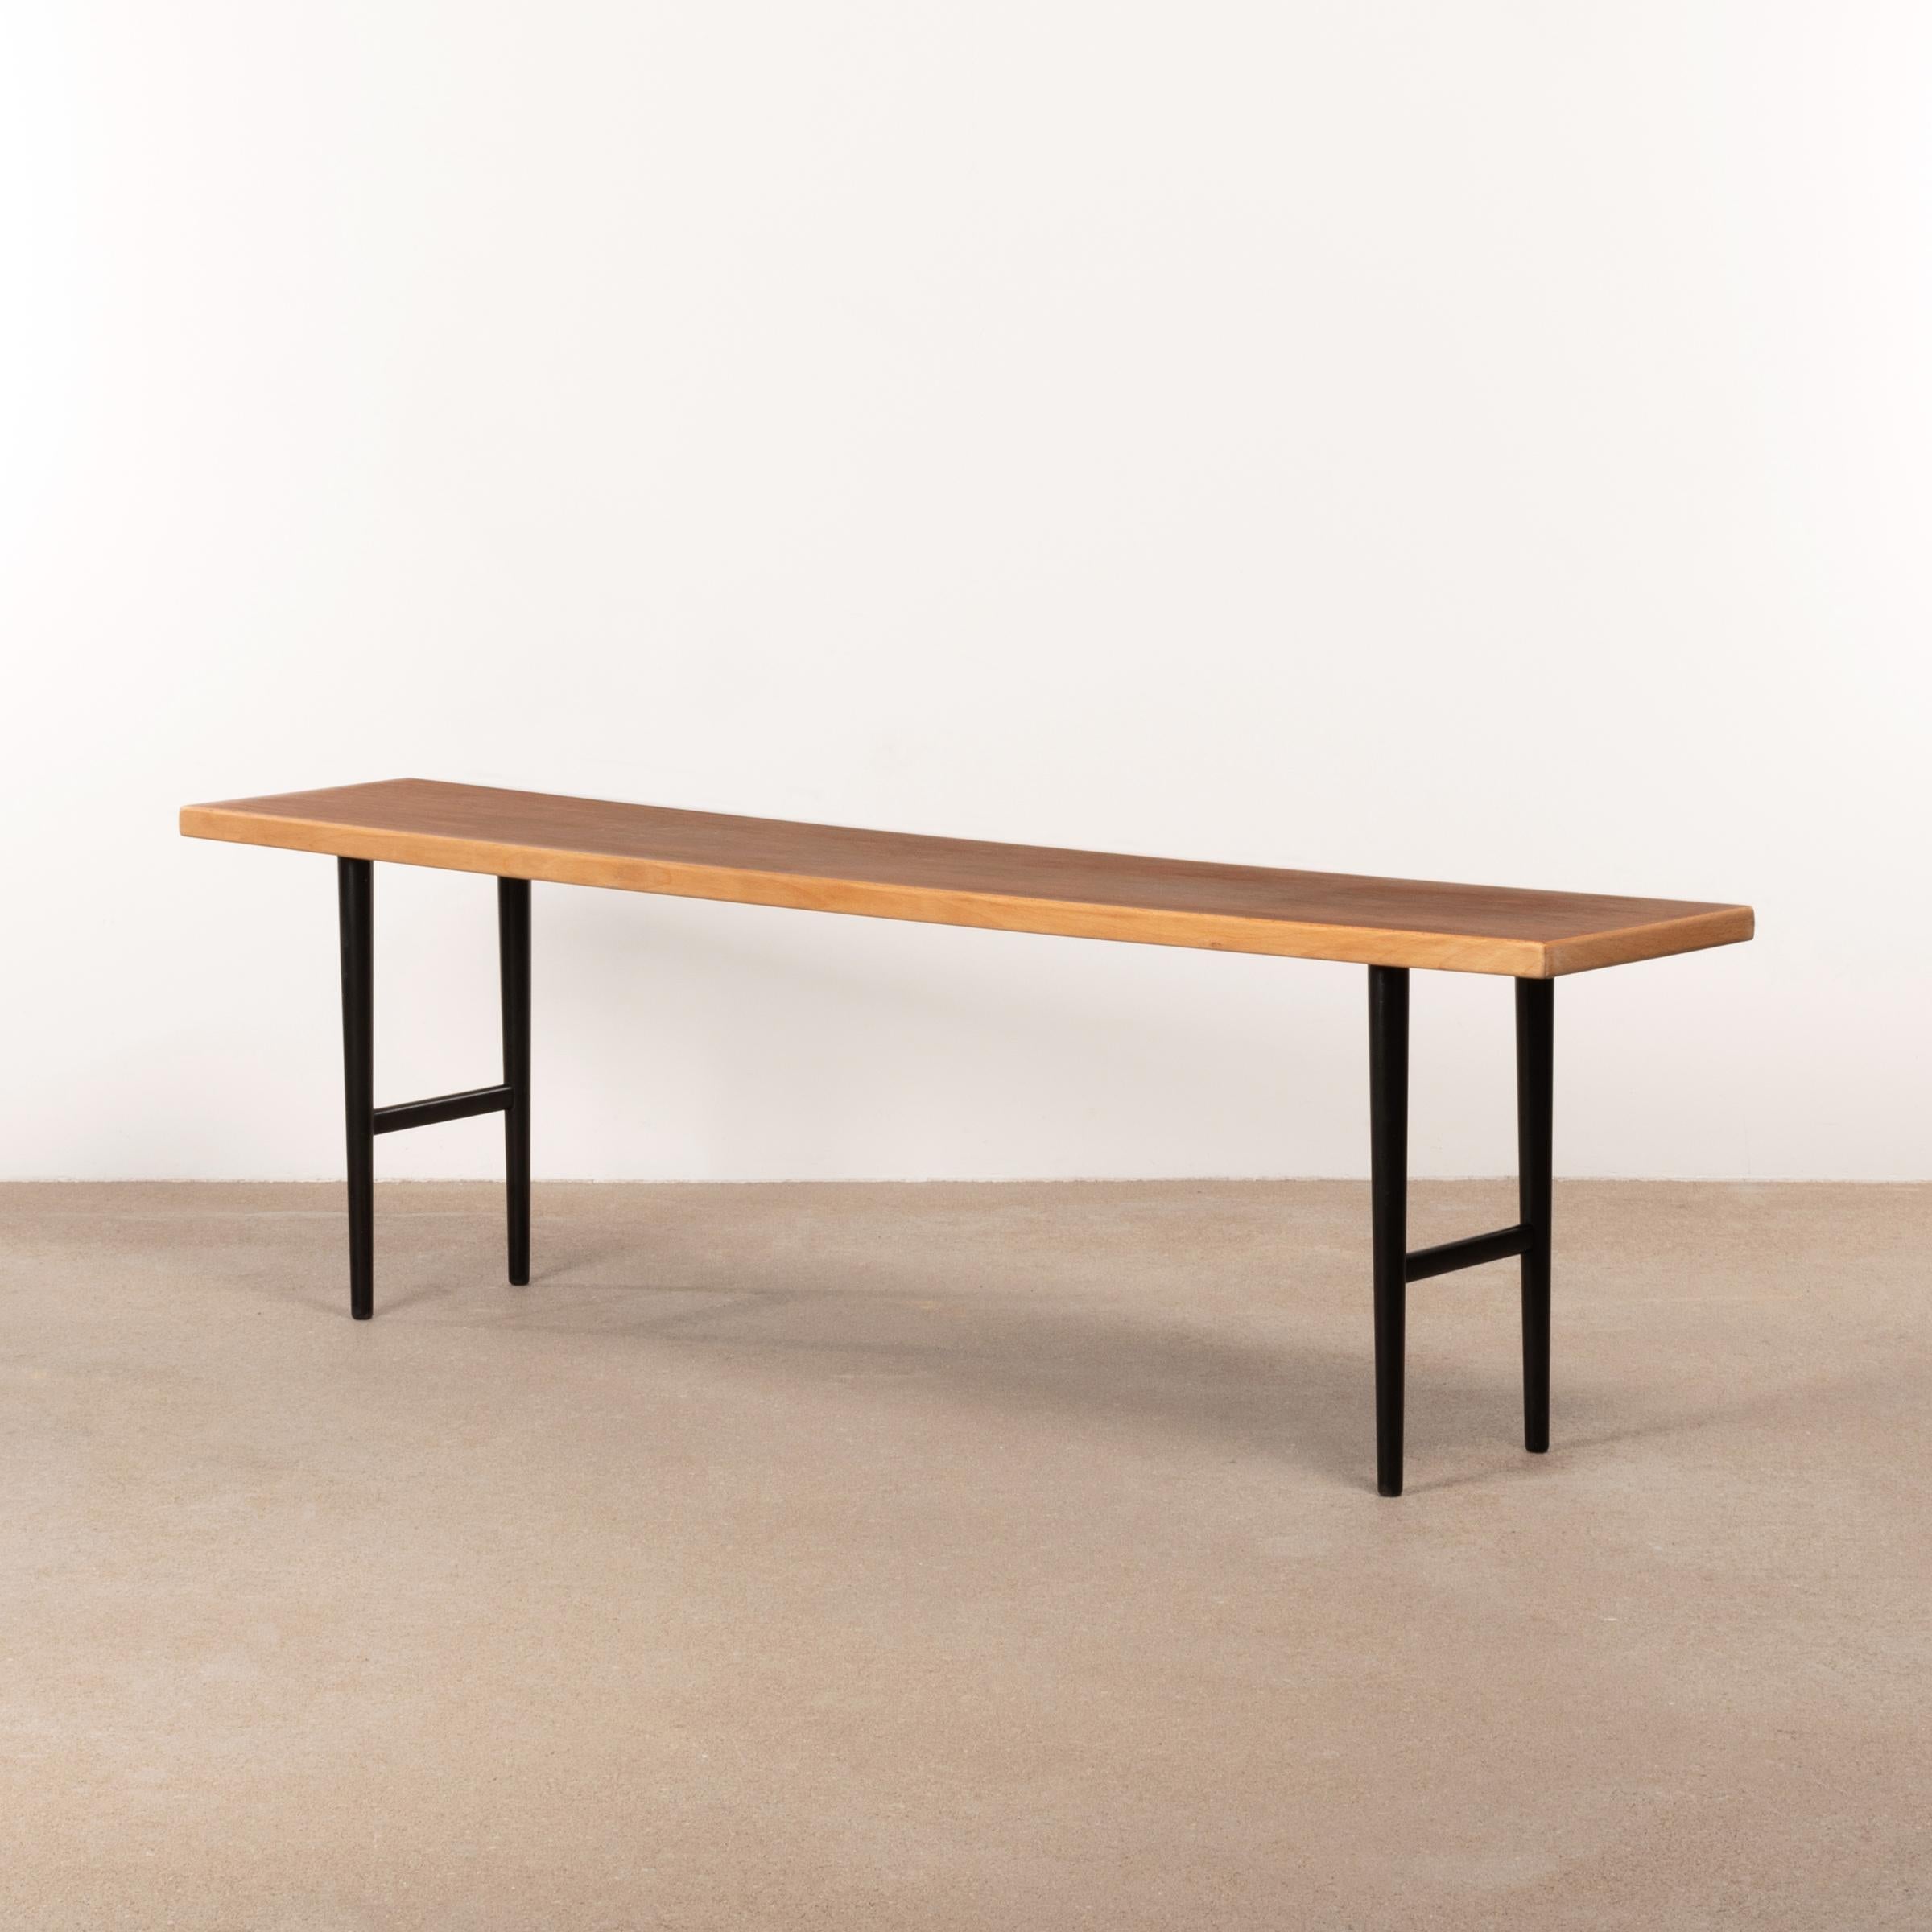 Rarely seen side table / bench by Kurt Østervig for Jason Møbler, Denmark. Brazilian rosewood table top with a solid Beech wood edge and black painted legs all in very good condition with minimal traces of use. CITES certificate / export permit